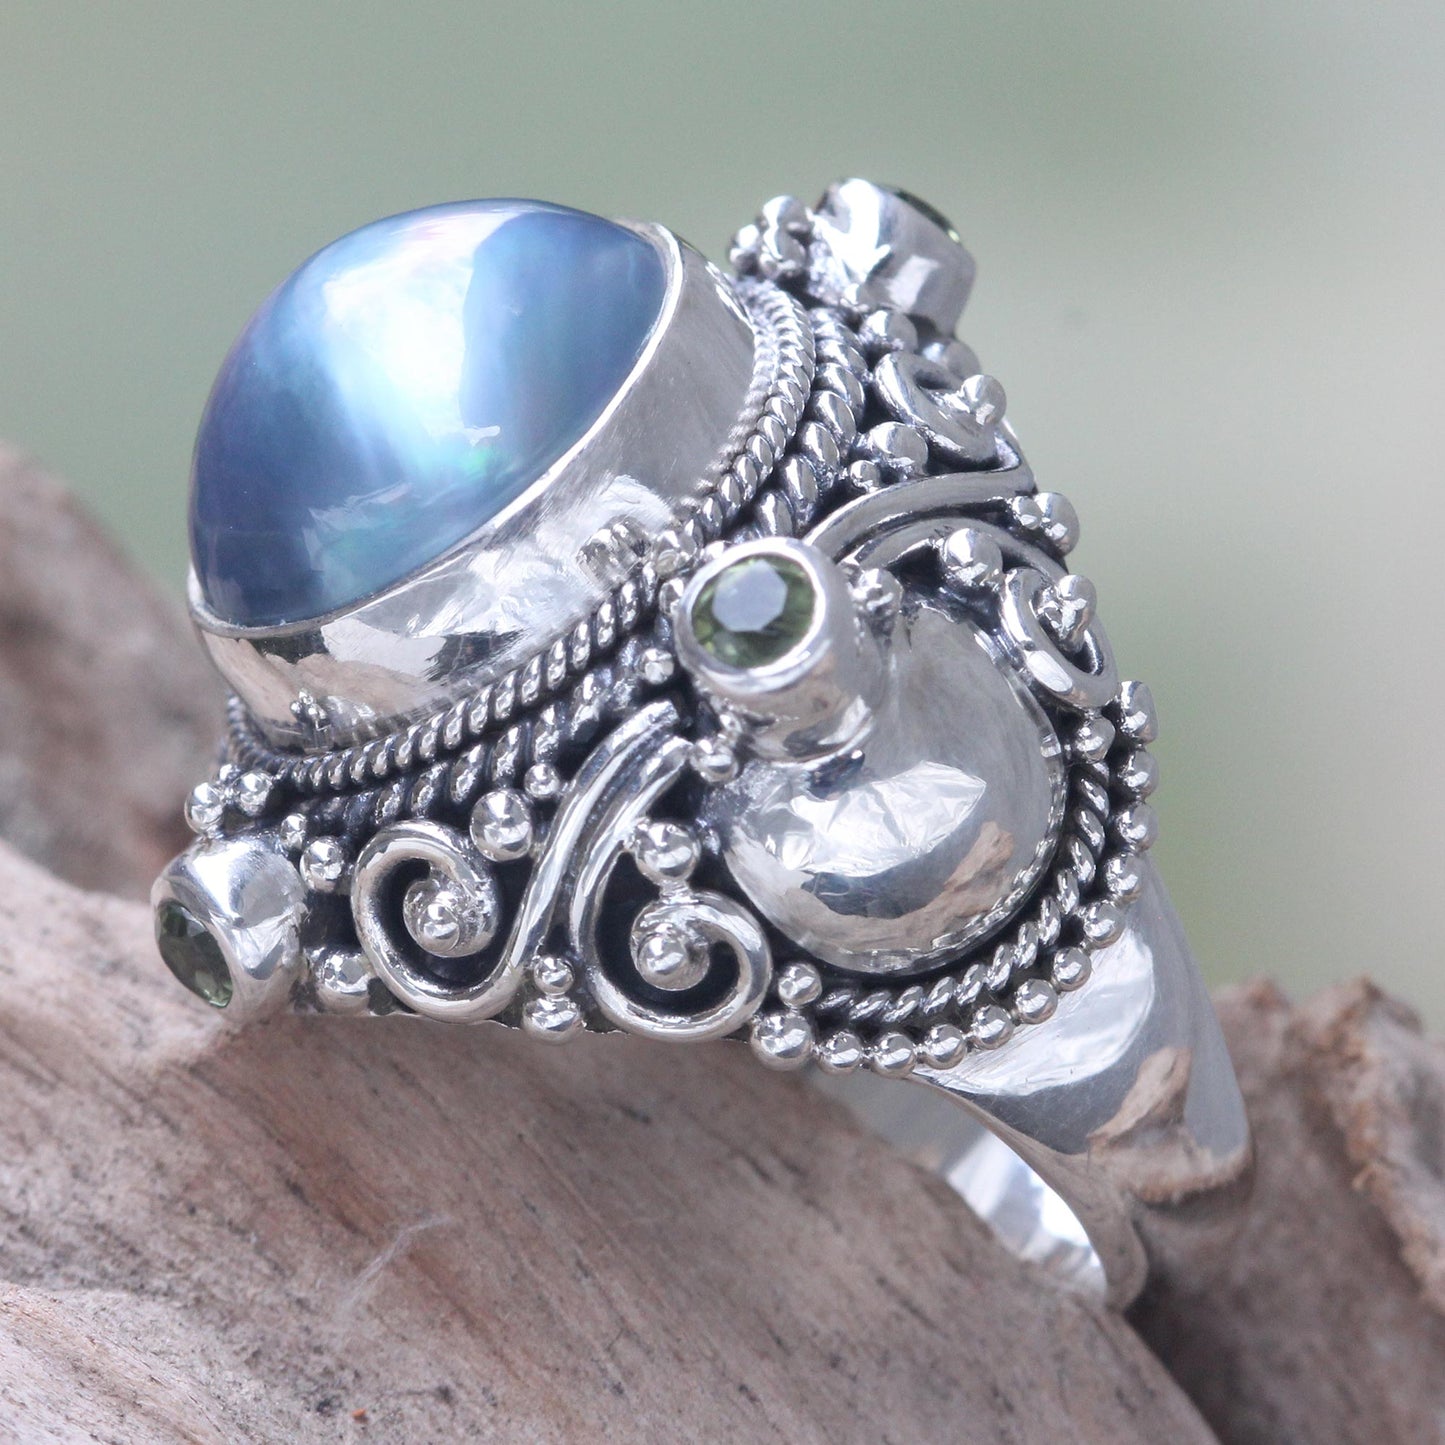 Regal Blue Glory Artisan Crafted Blue Mabe Pearl and Peridot Cocktail Ring